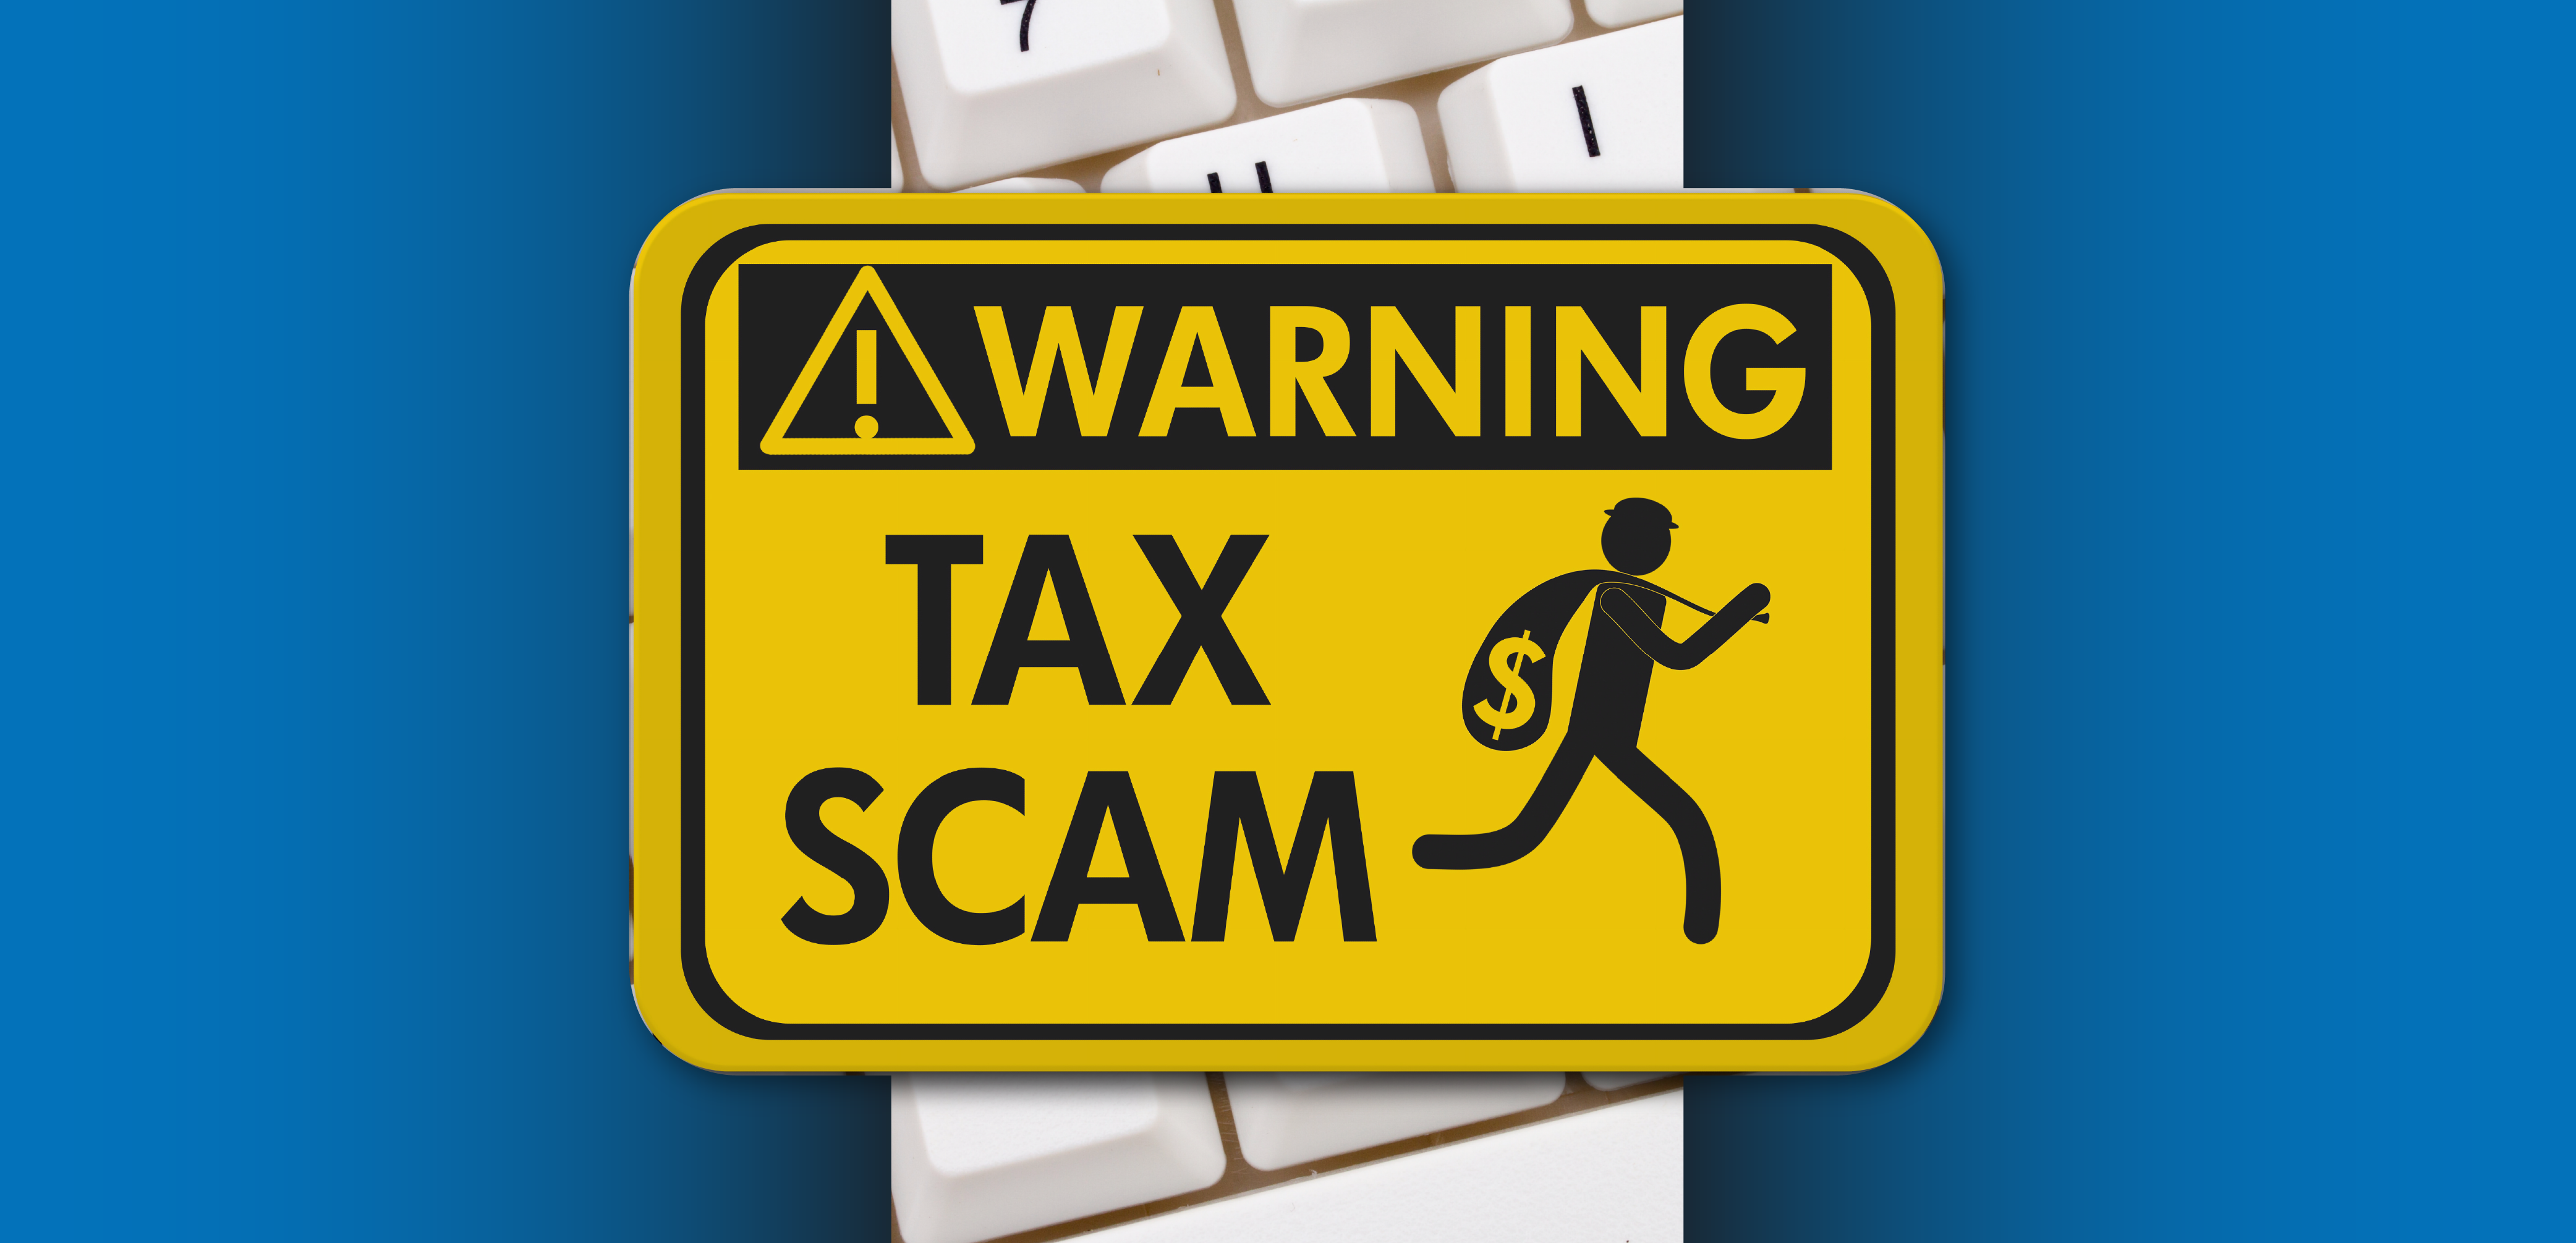 Warning sign with an icon of a person running with a bag of money and the words 'WARNING TAX SCAM' on a yellow background above a keyboard